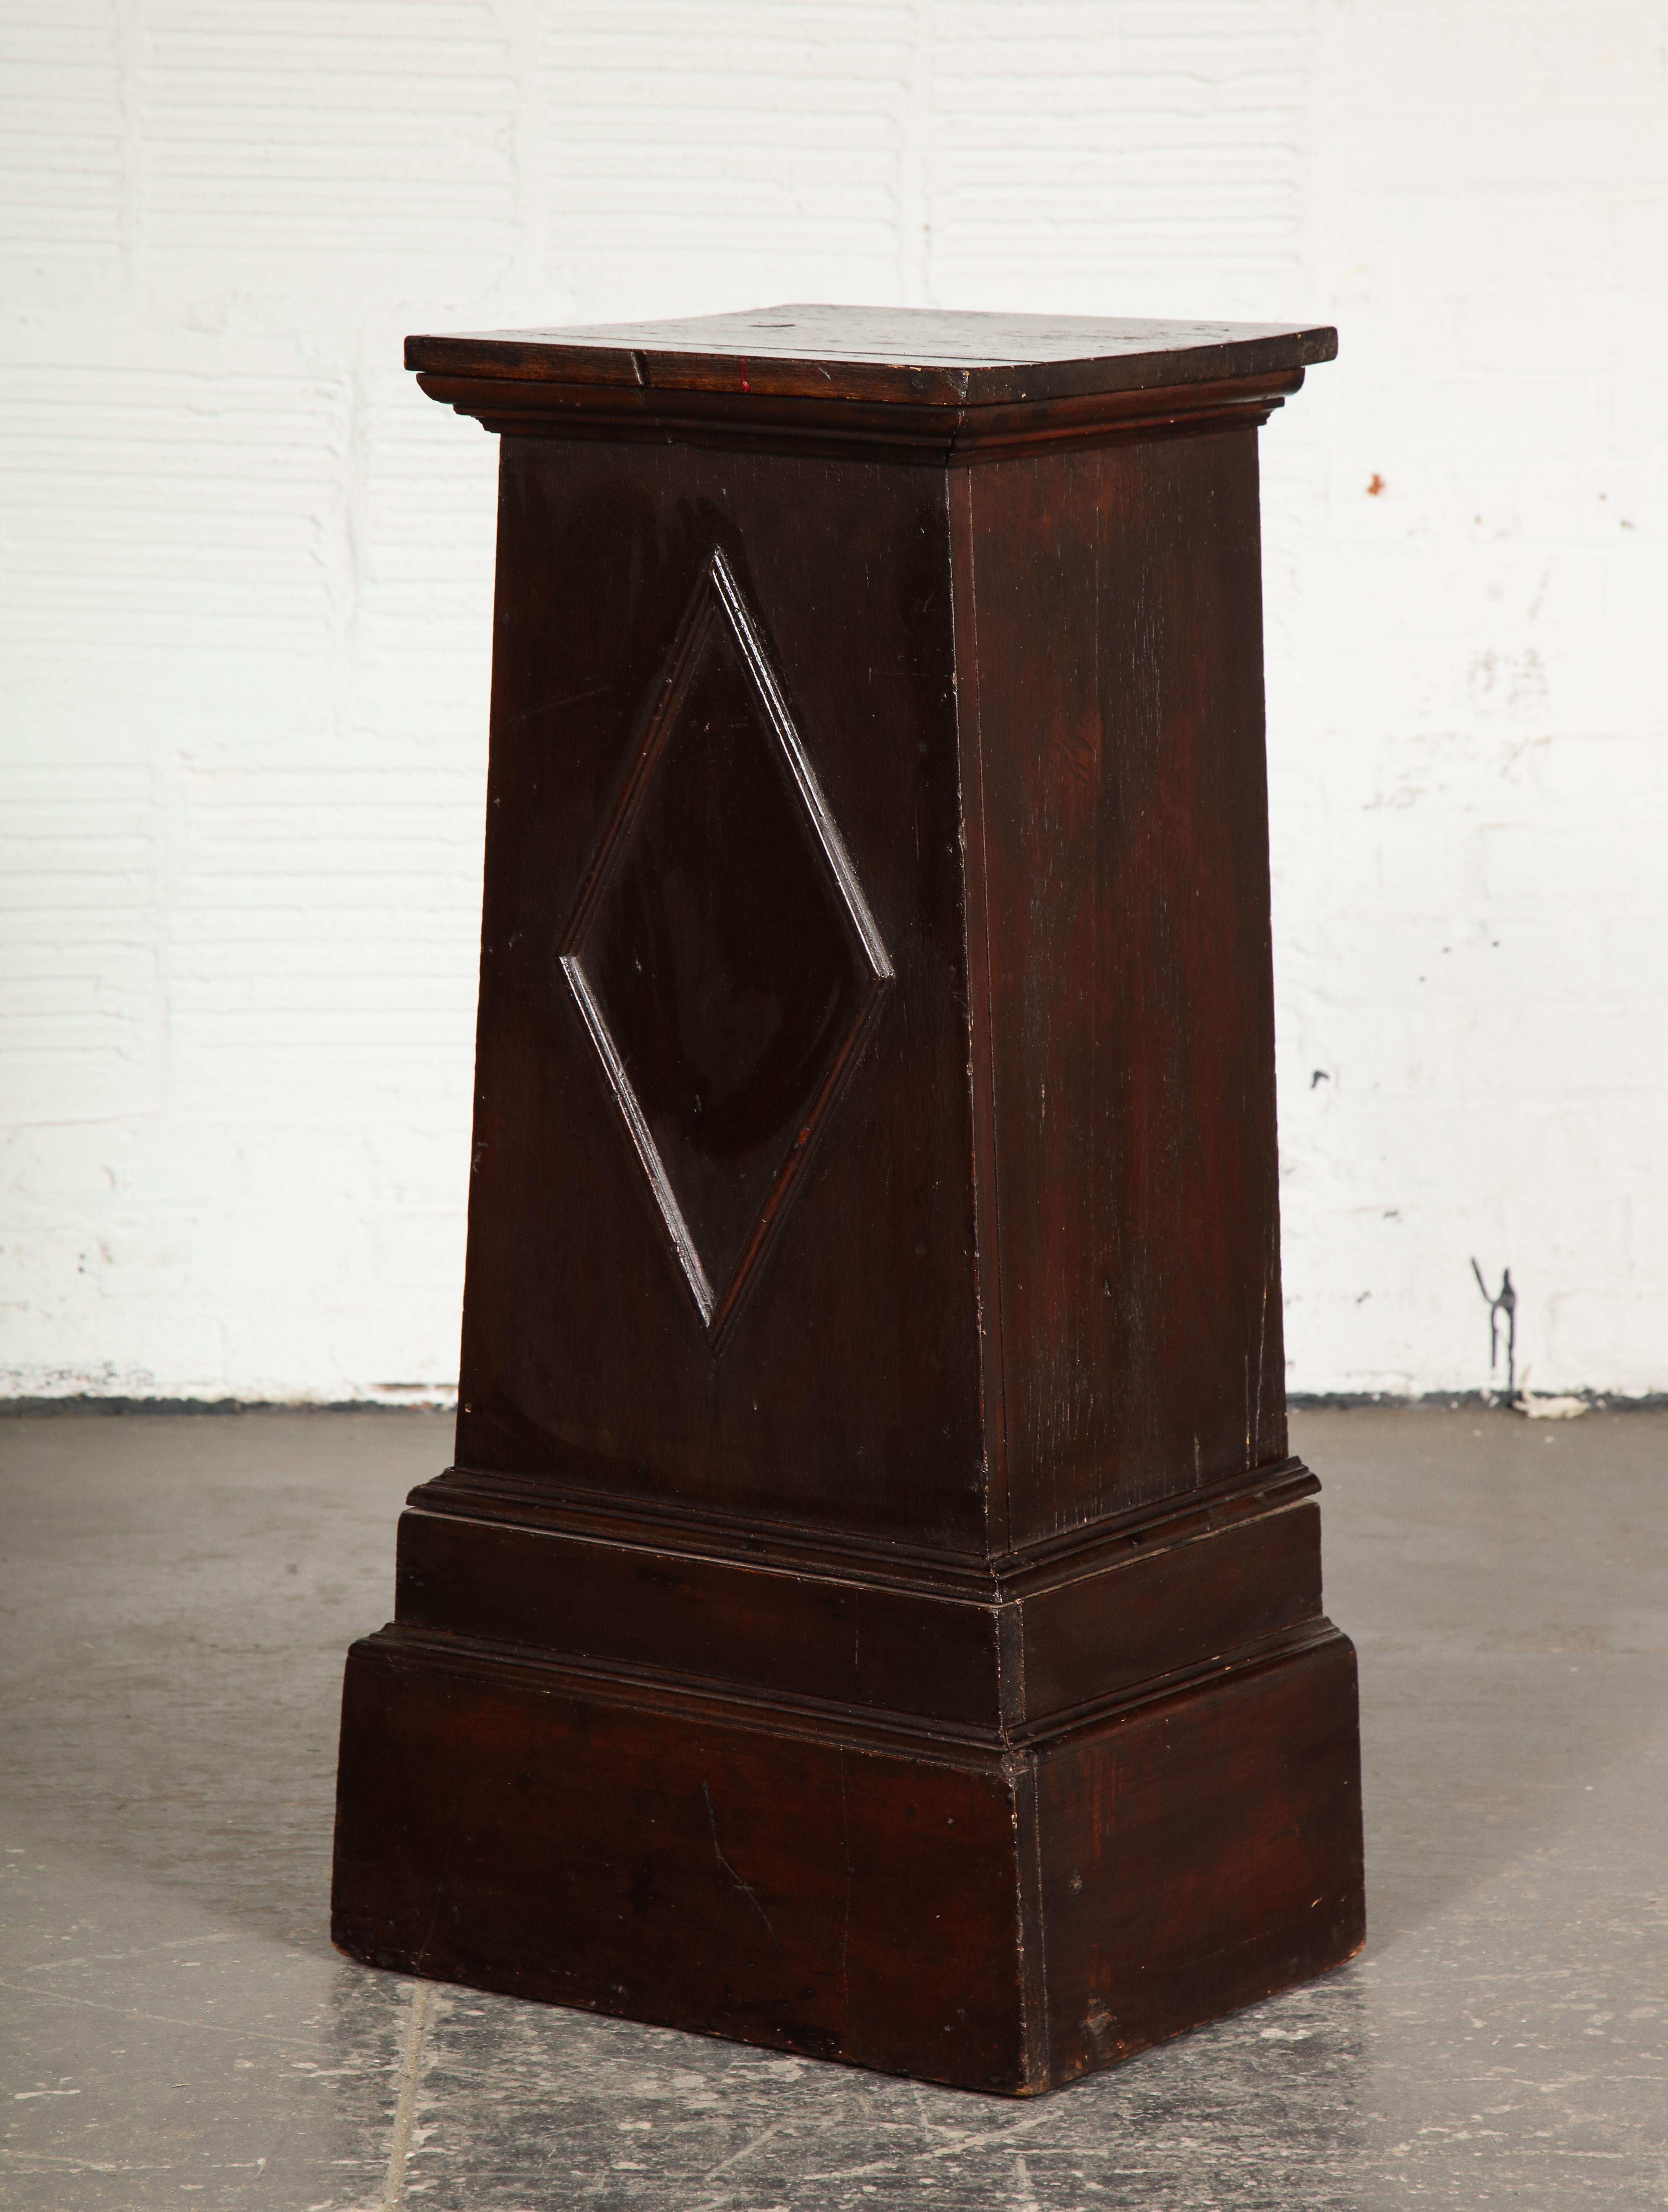 Each of square spreading form with applied diamond motif on a stepped plinth base; painted to resemble mahogany; reverse open with a shelf.